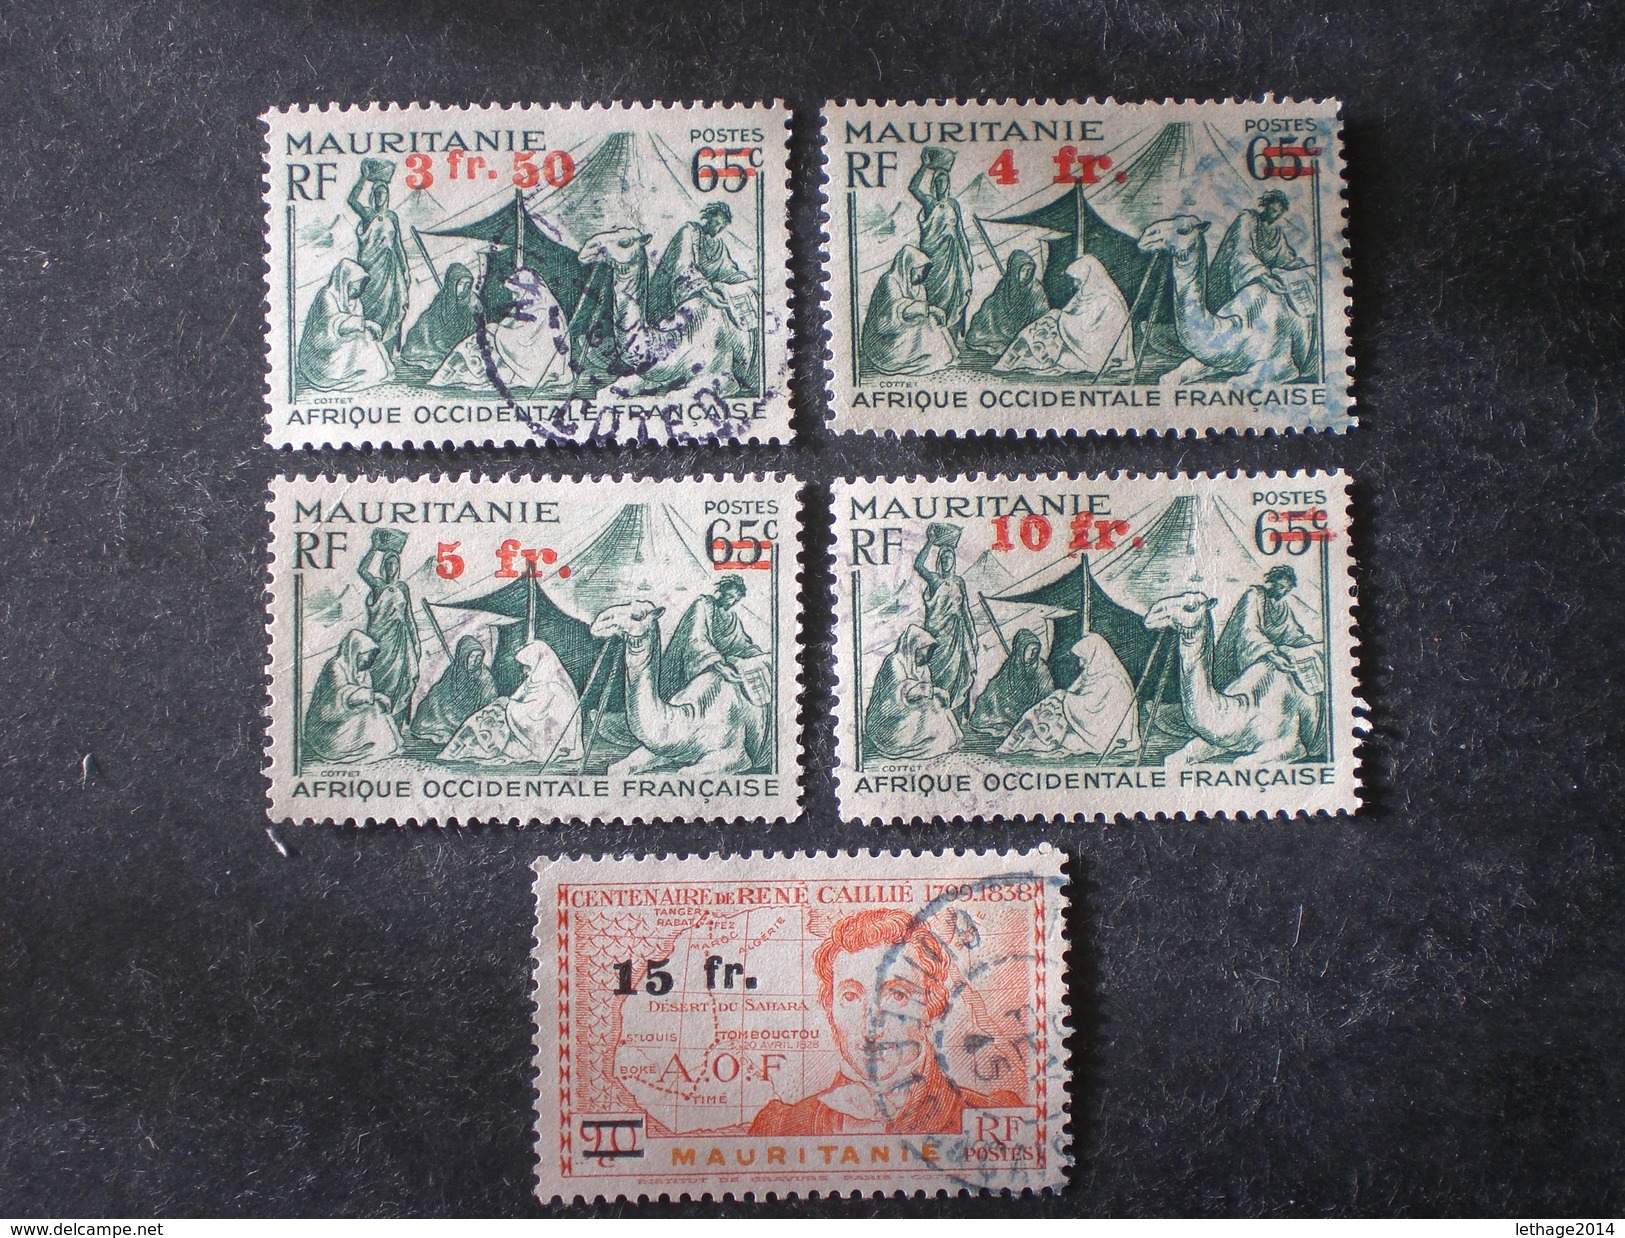 AOF MAURITANIA MAURITANIE موريتانيا Mauritanië 1944 Issues Of 1938 And 1939 Surcharged - Usati